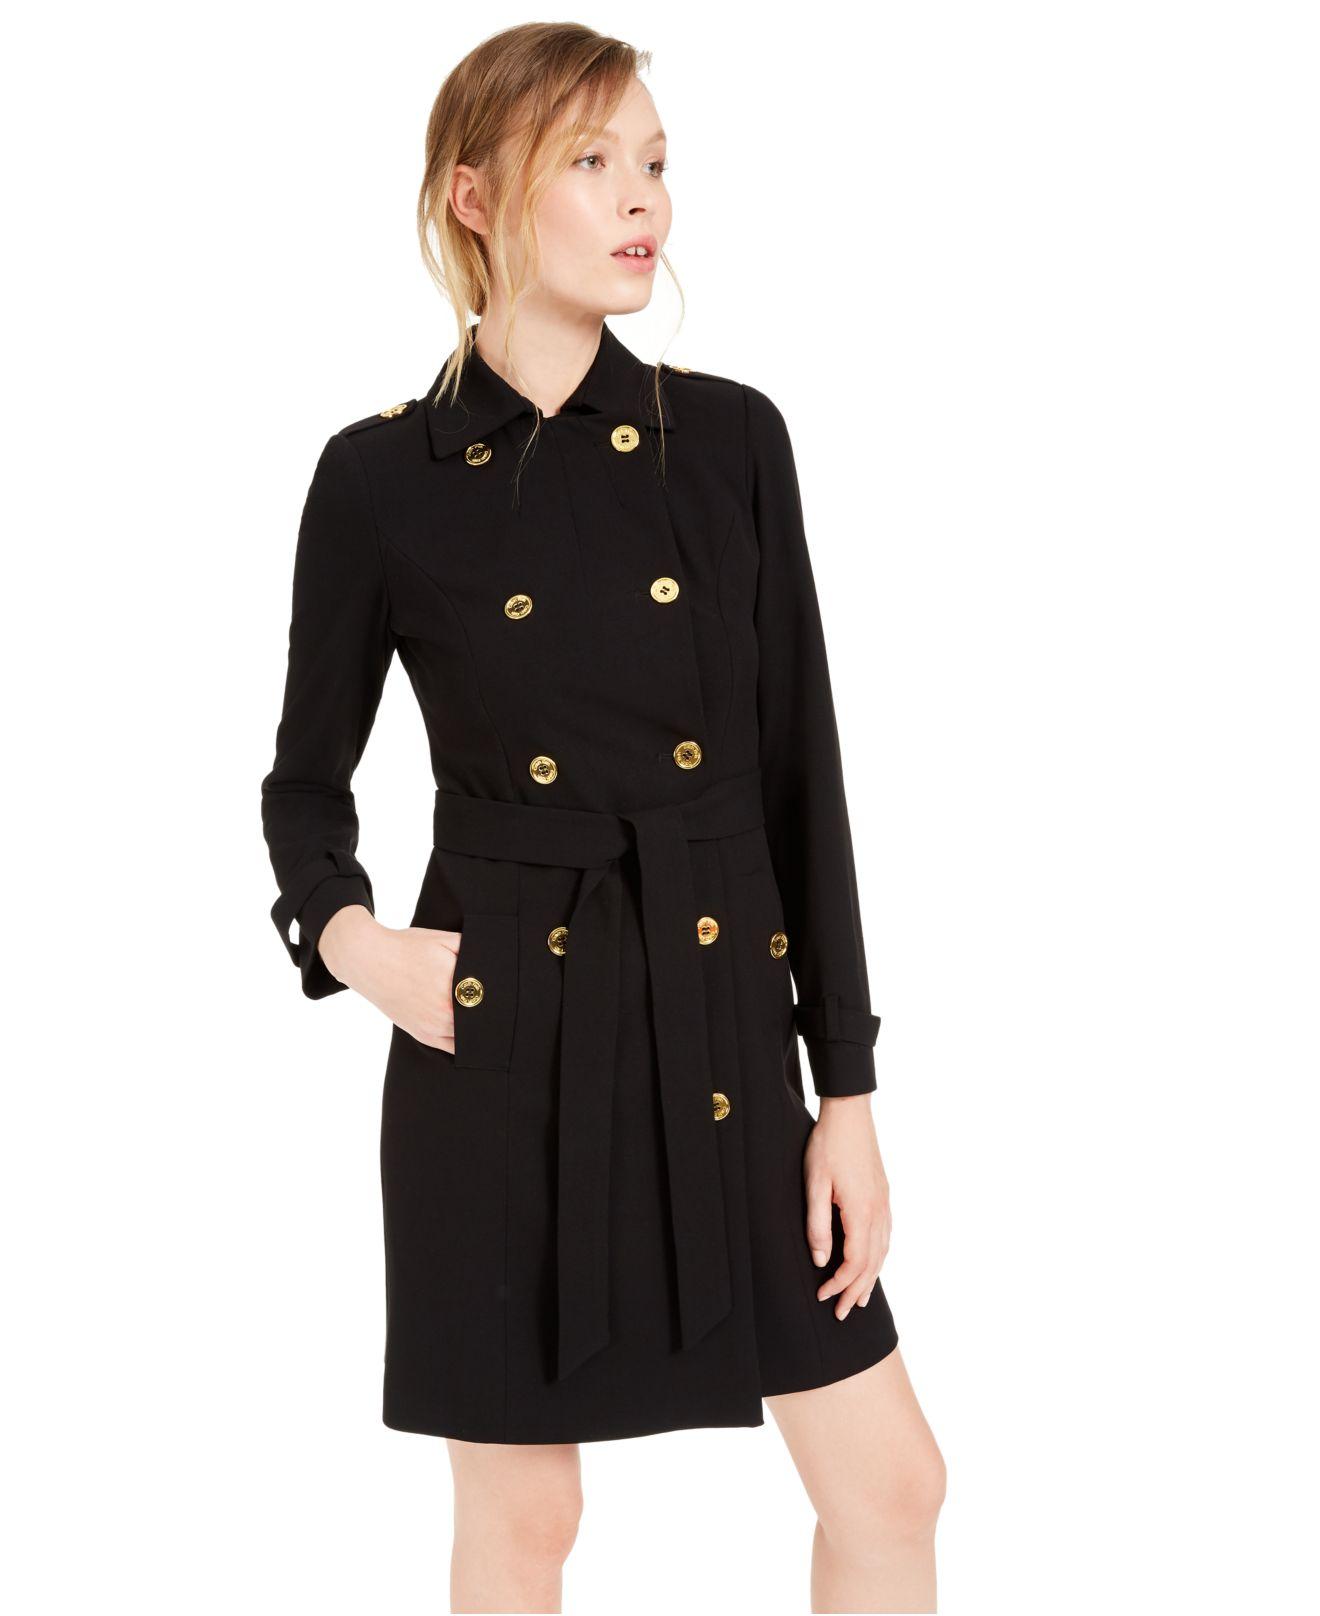 Calvin Klein Synthetic Military-coat Dress in Black - Lyst